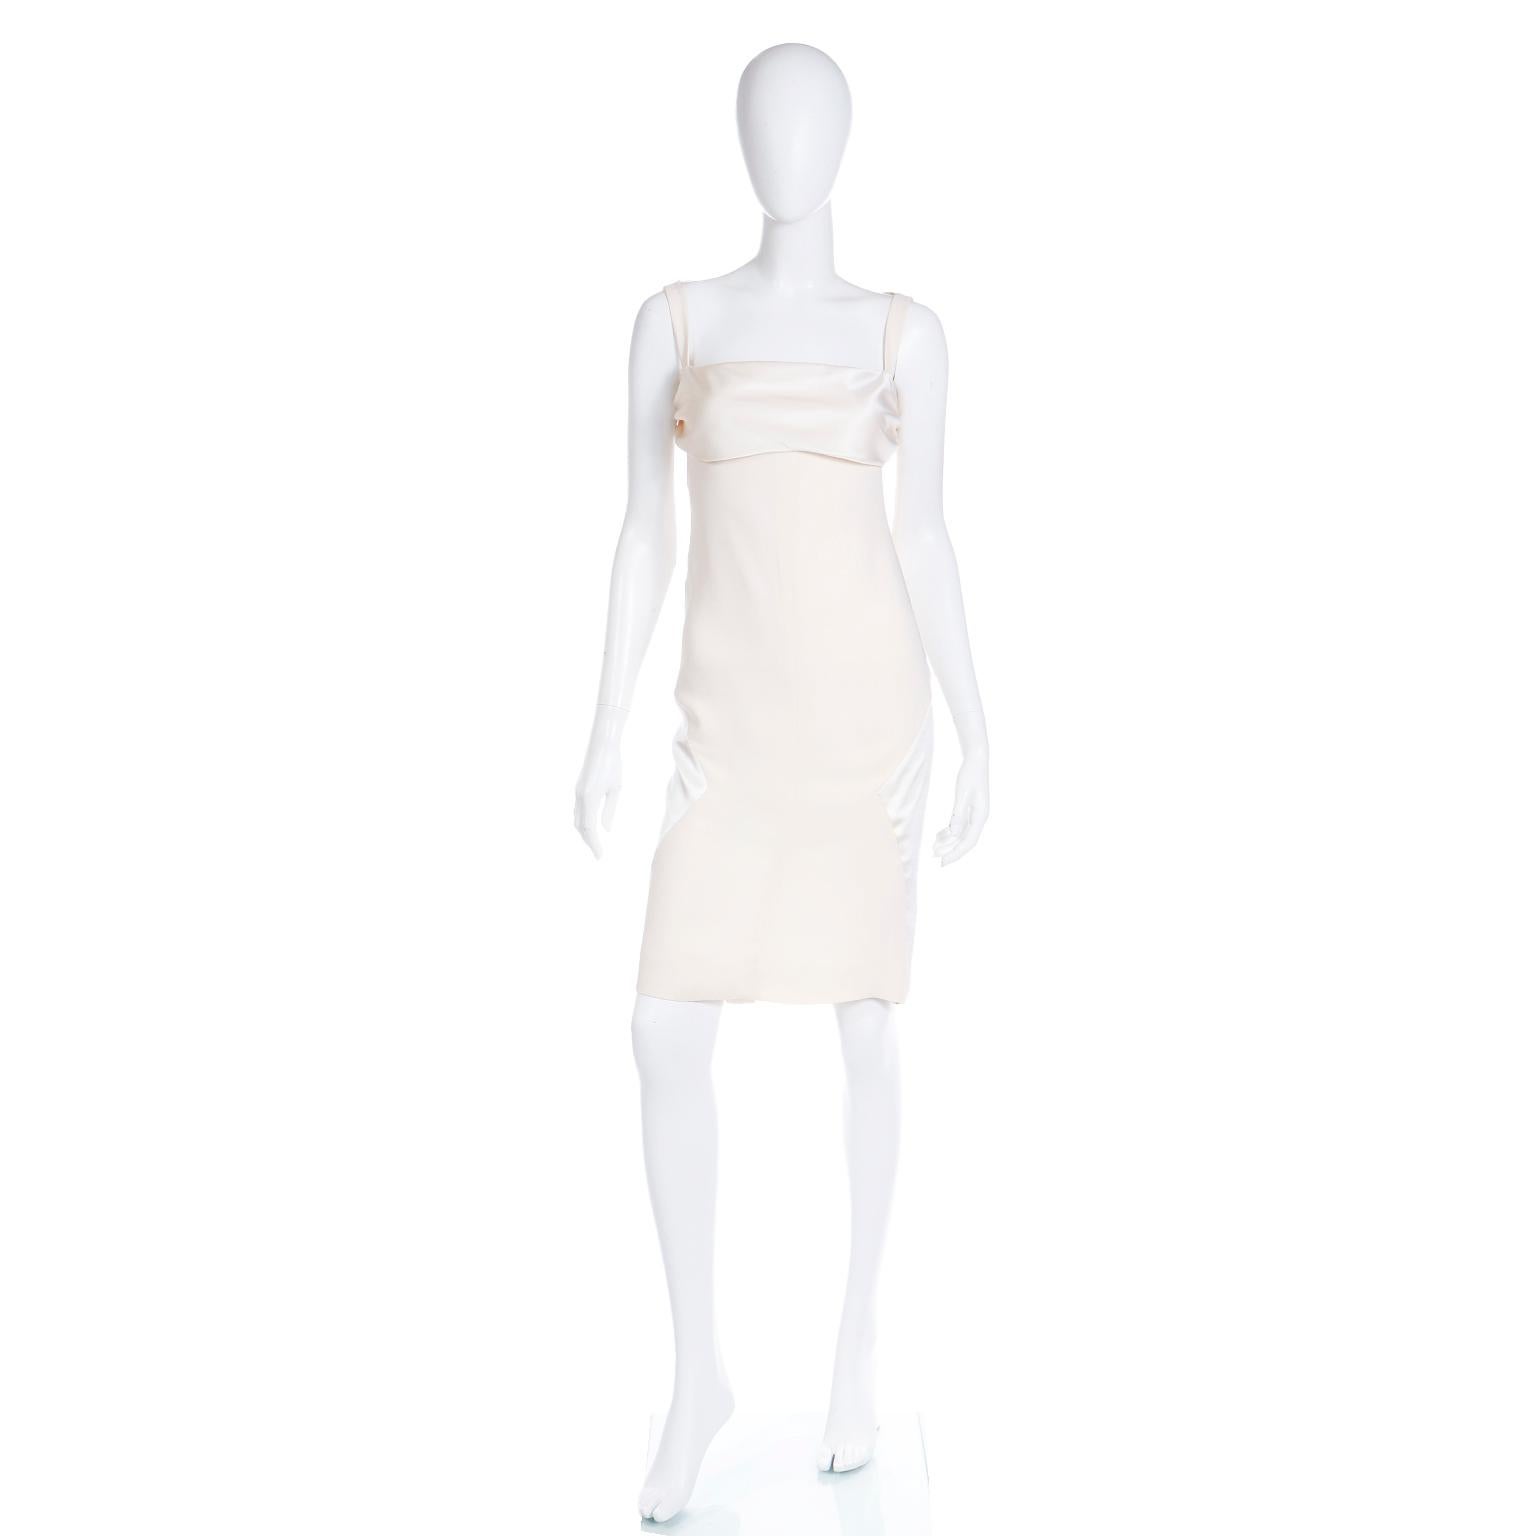 We adore Valentino Garavani dresses and this stunning ivory evening dress is no exception. Made from a matte silk blend crepe and 100% silk charmeuse, this dress is the epitome of quiet luxury and elegance.

The dress features silk charmeuse